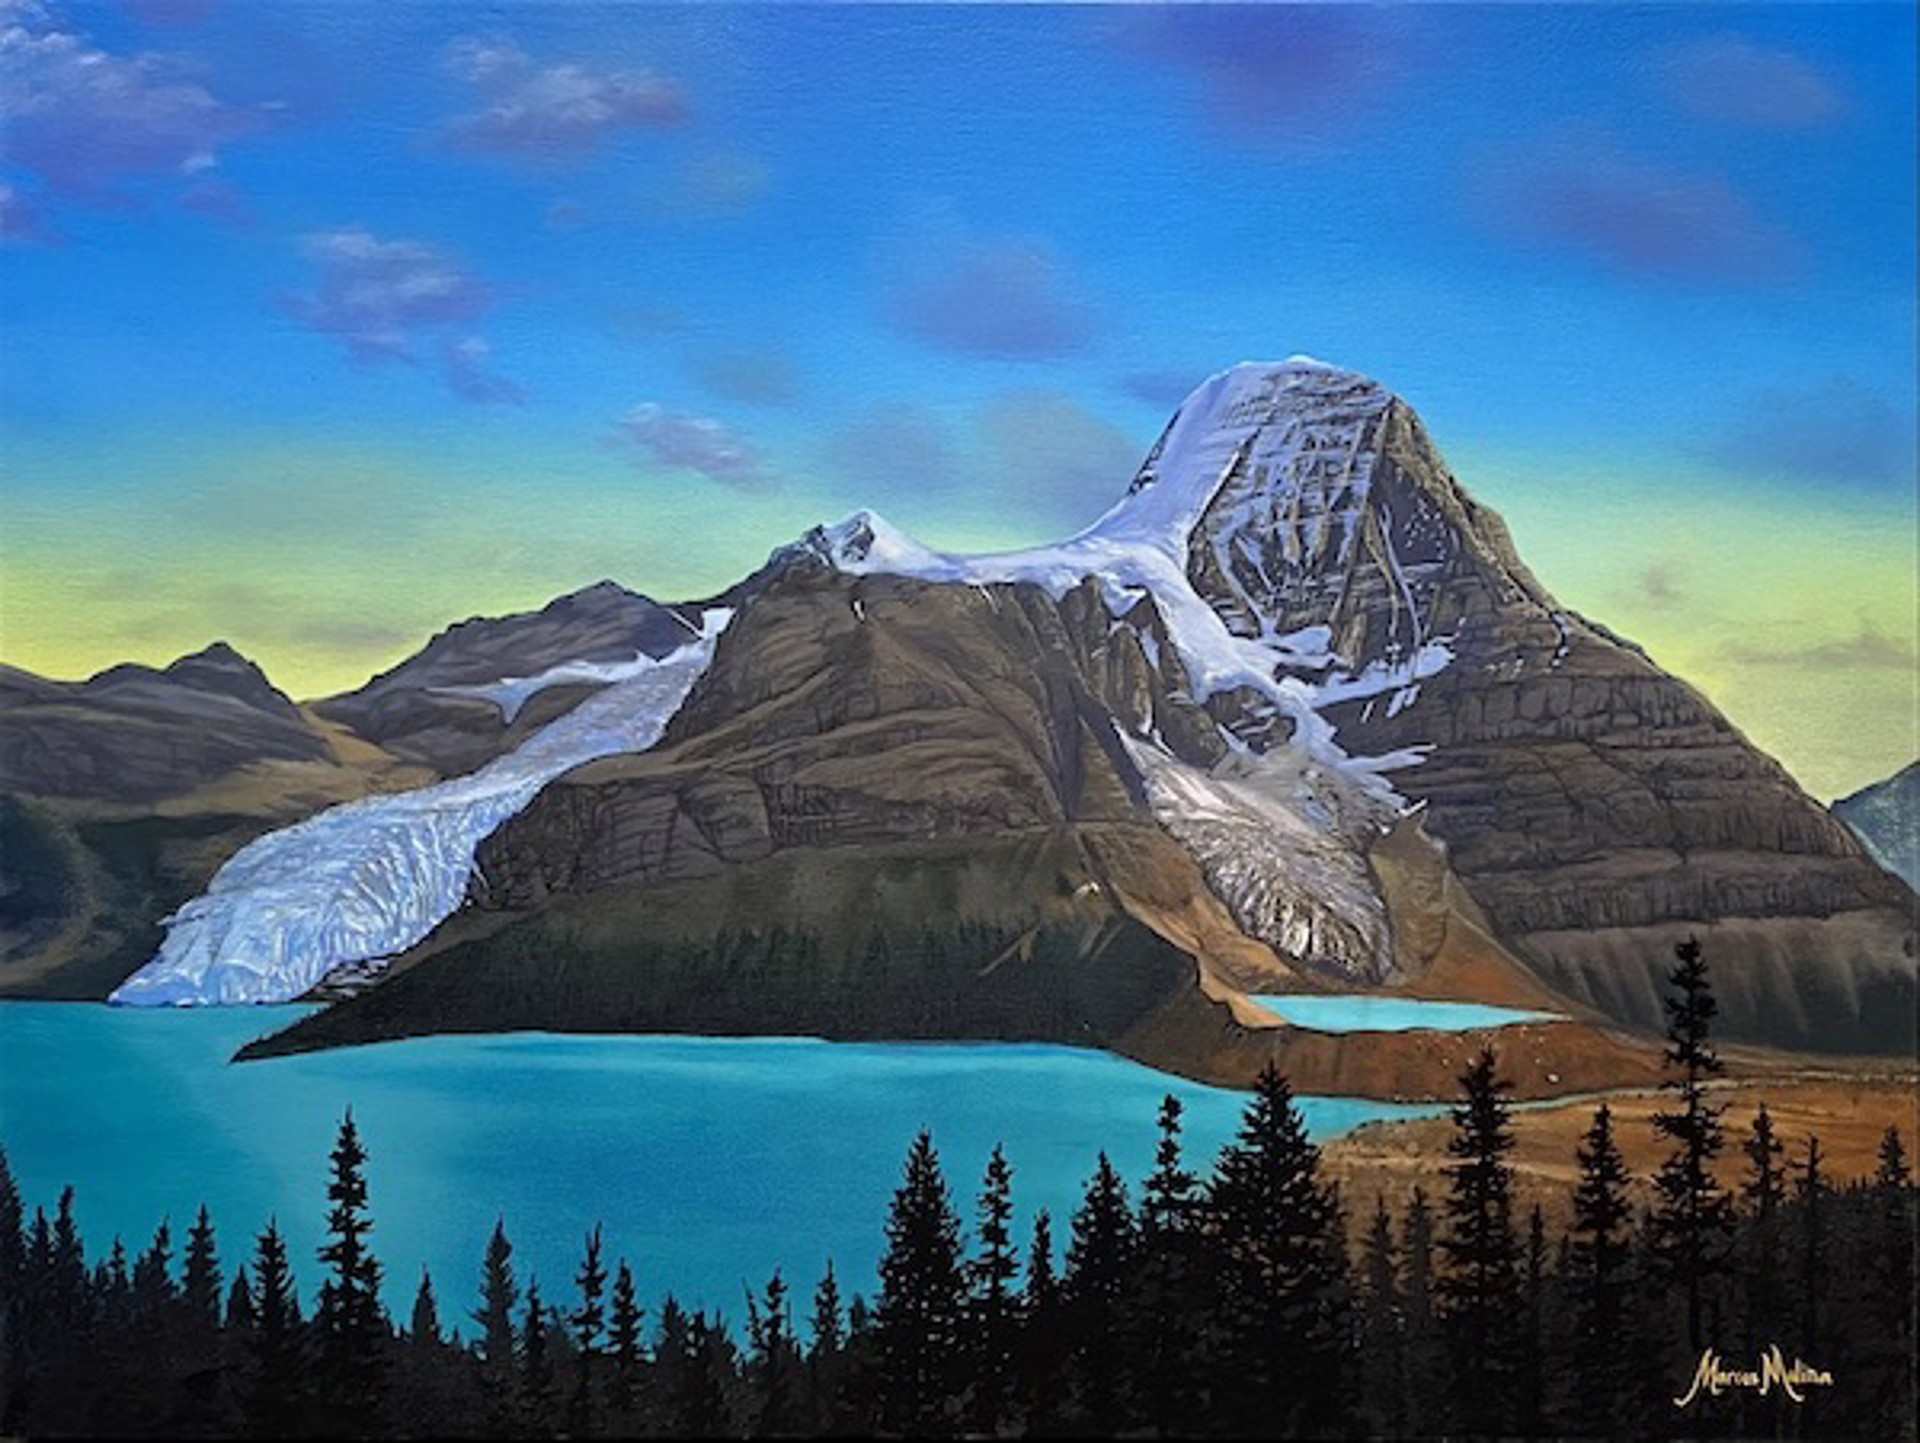 Mighty Mount Robson by Marcos Molina